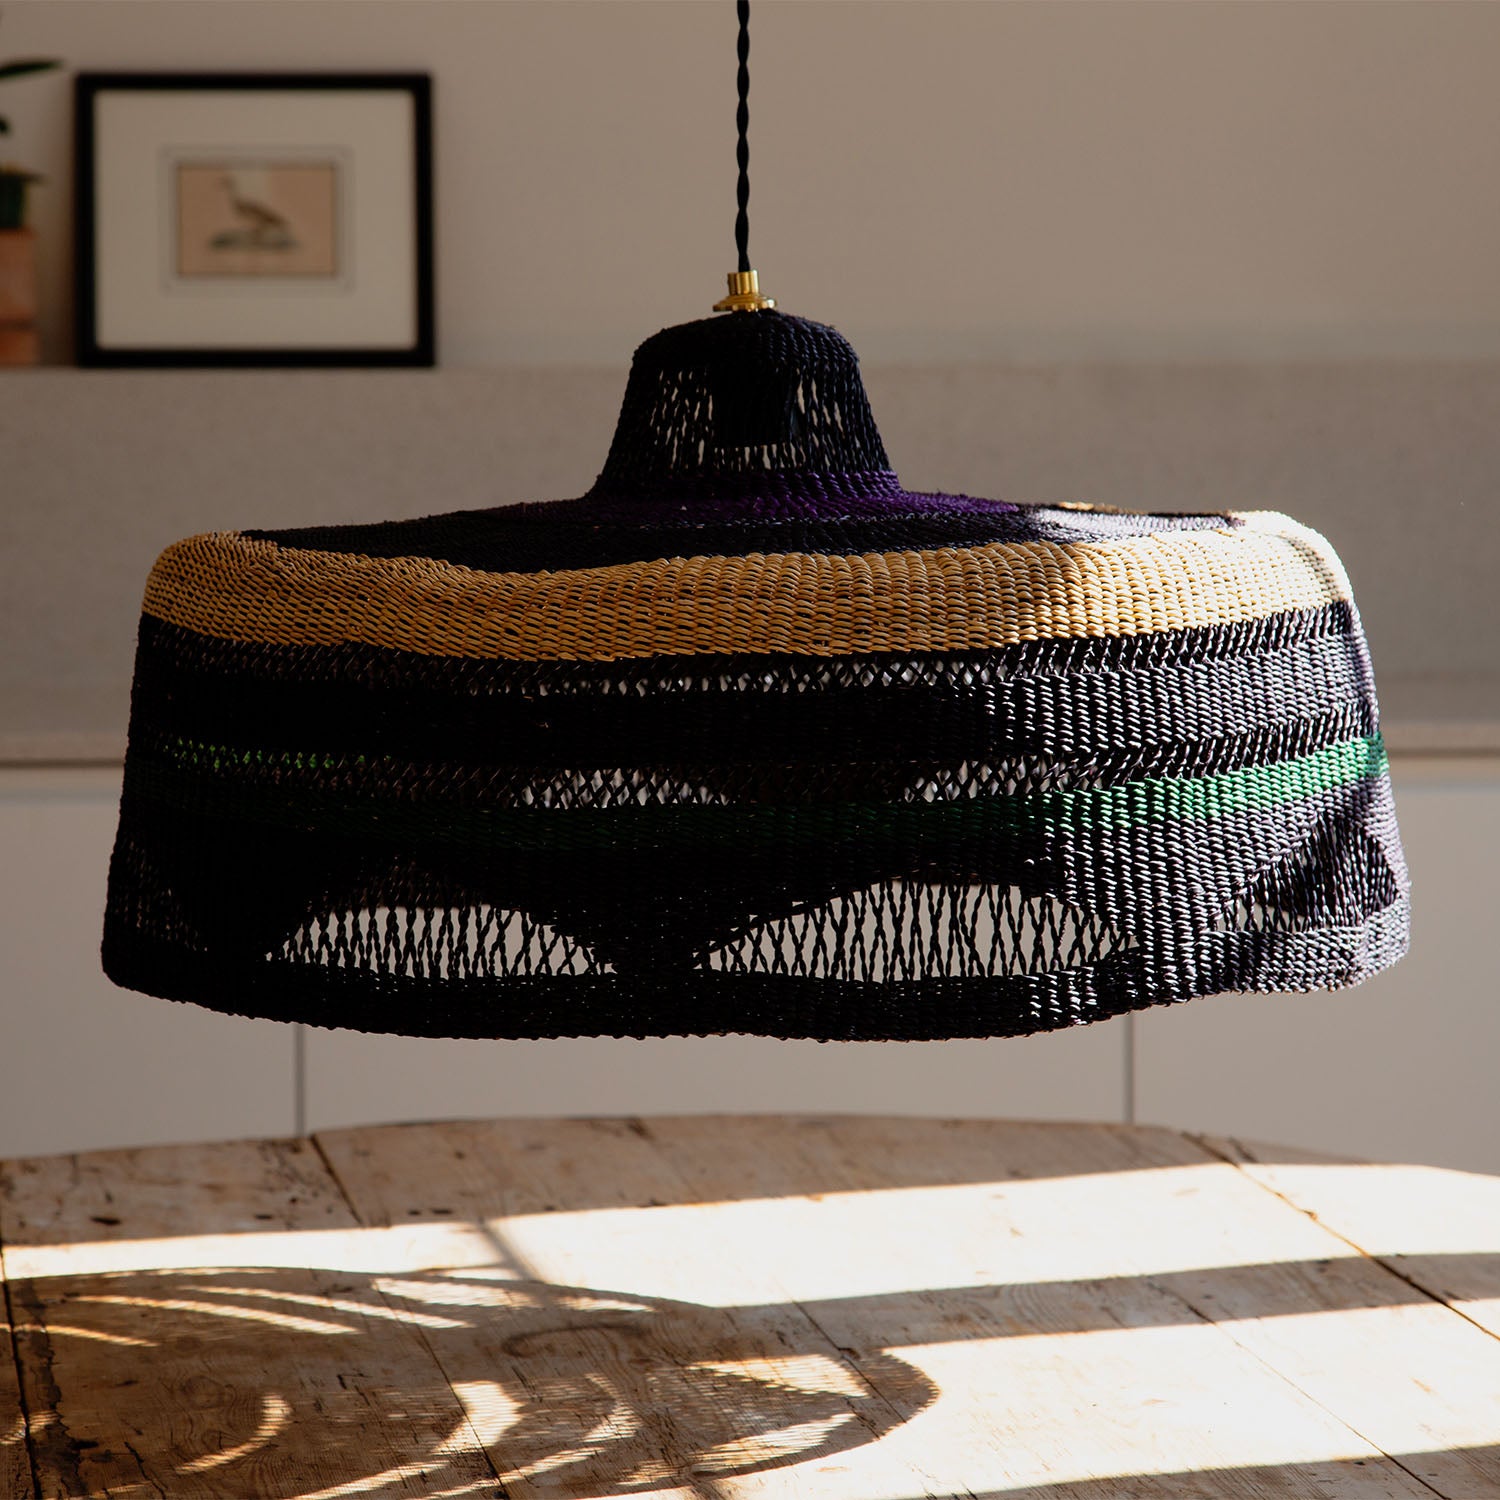 Stylish woven pendant light with colorful stripes adds warmth to room.